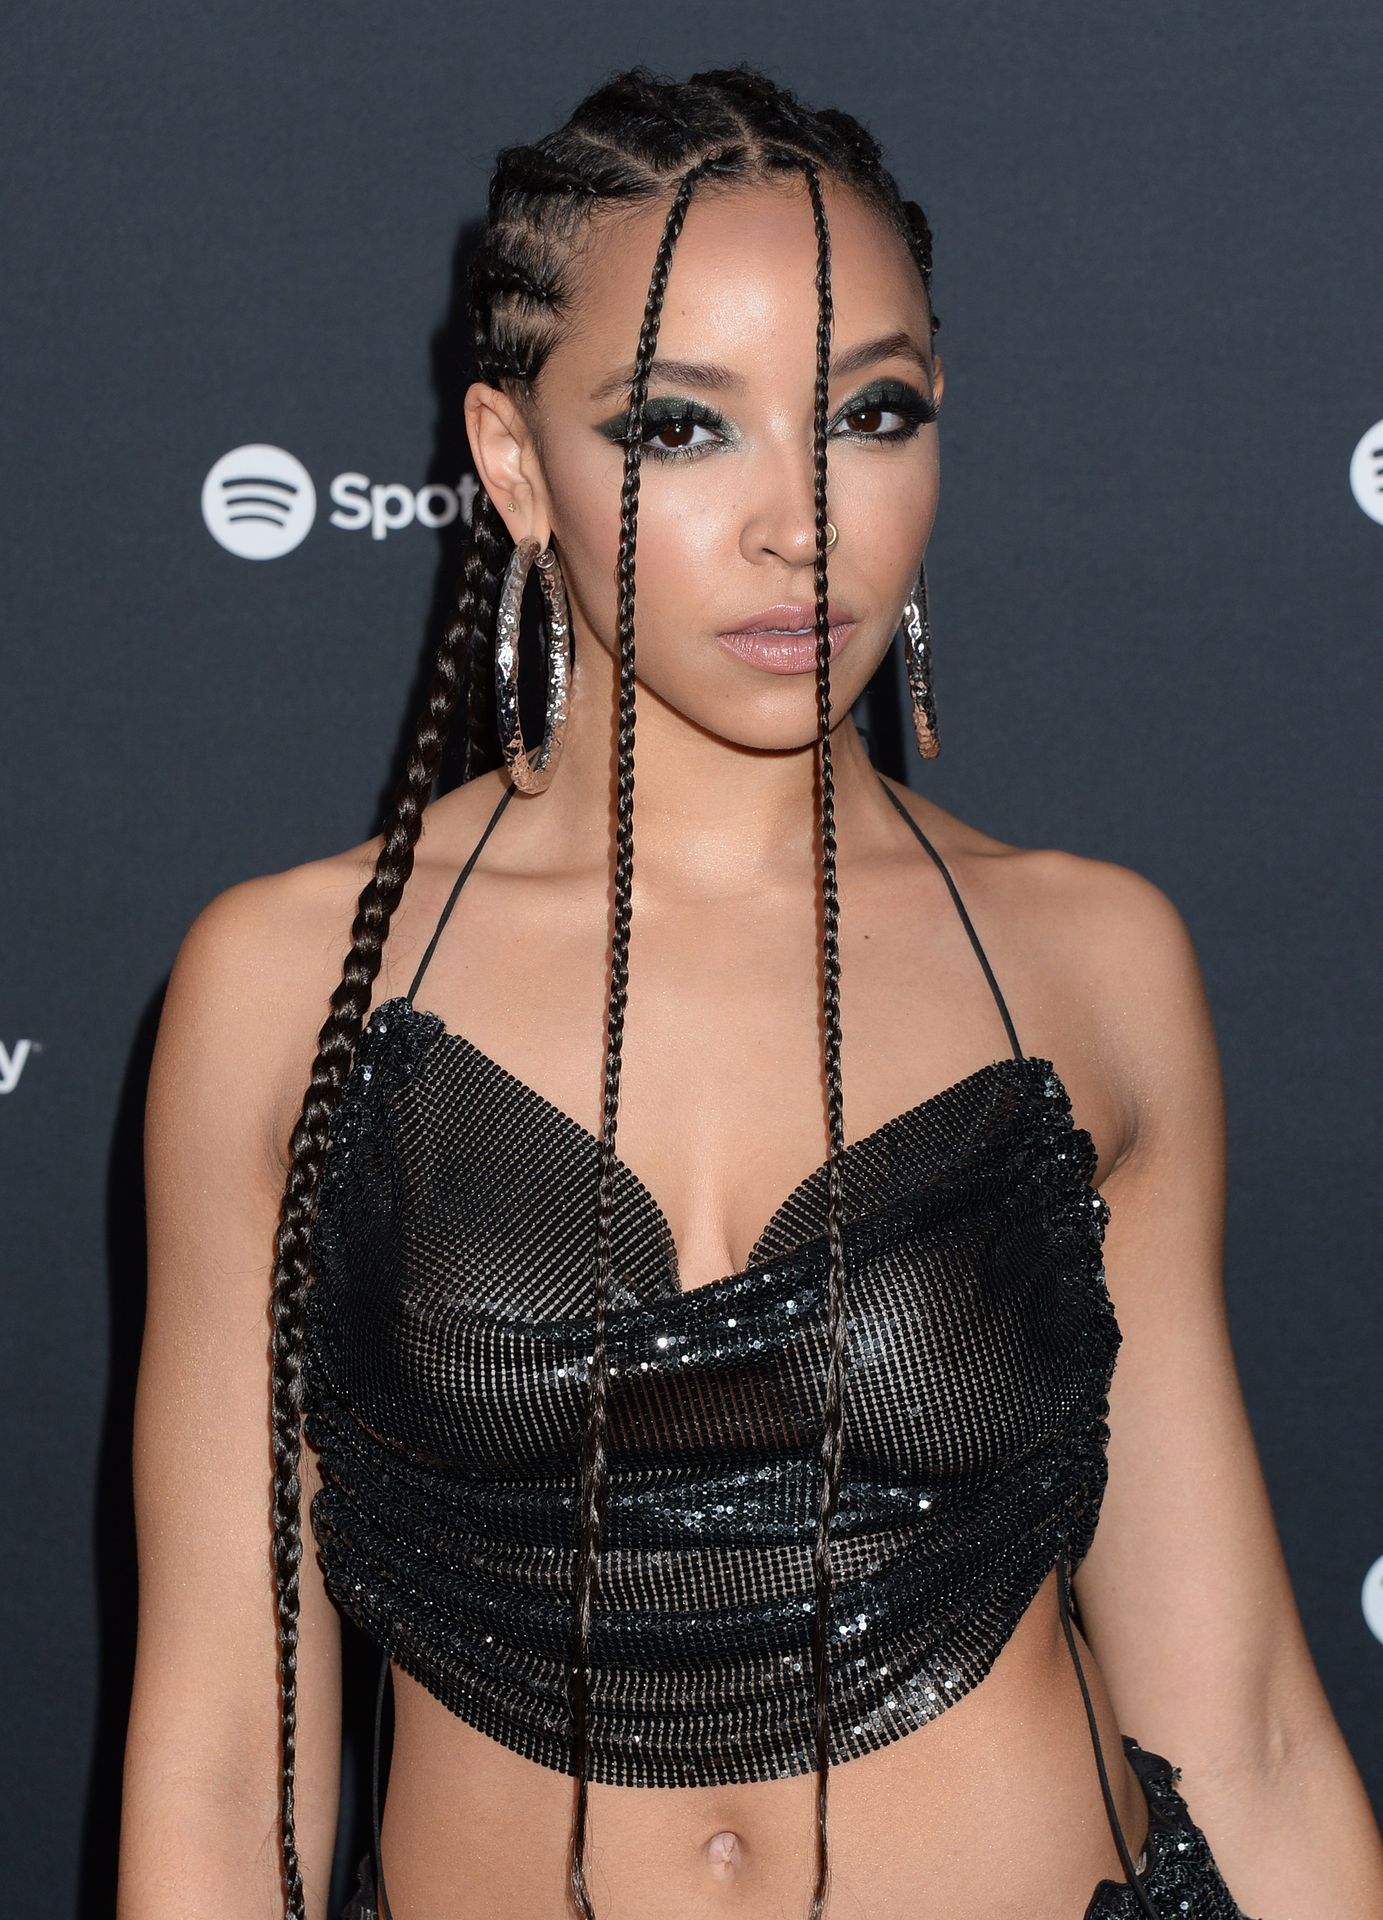 Tinashe Flaunts Her Tits At The Spotify Best New Artist Party 0004